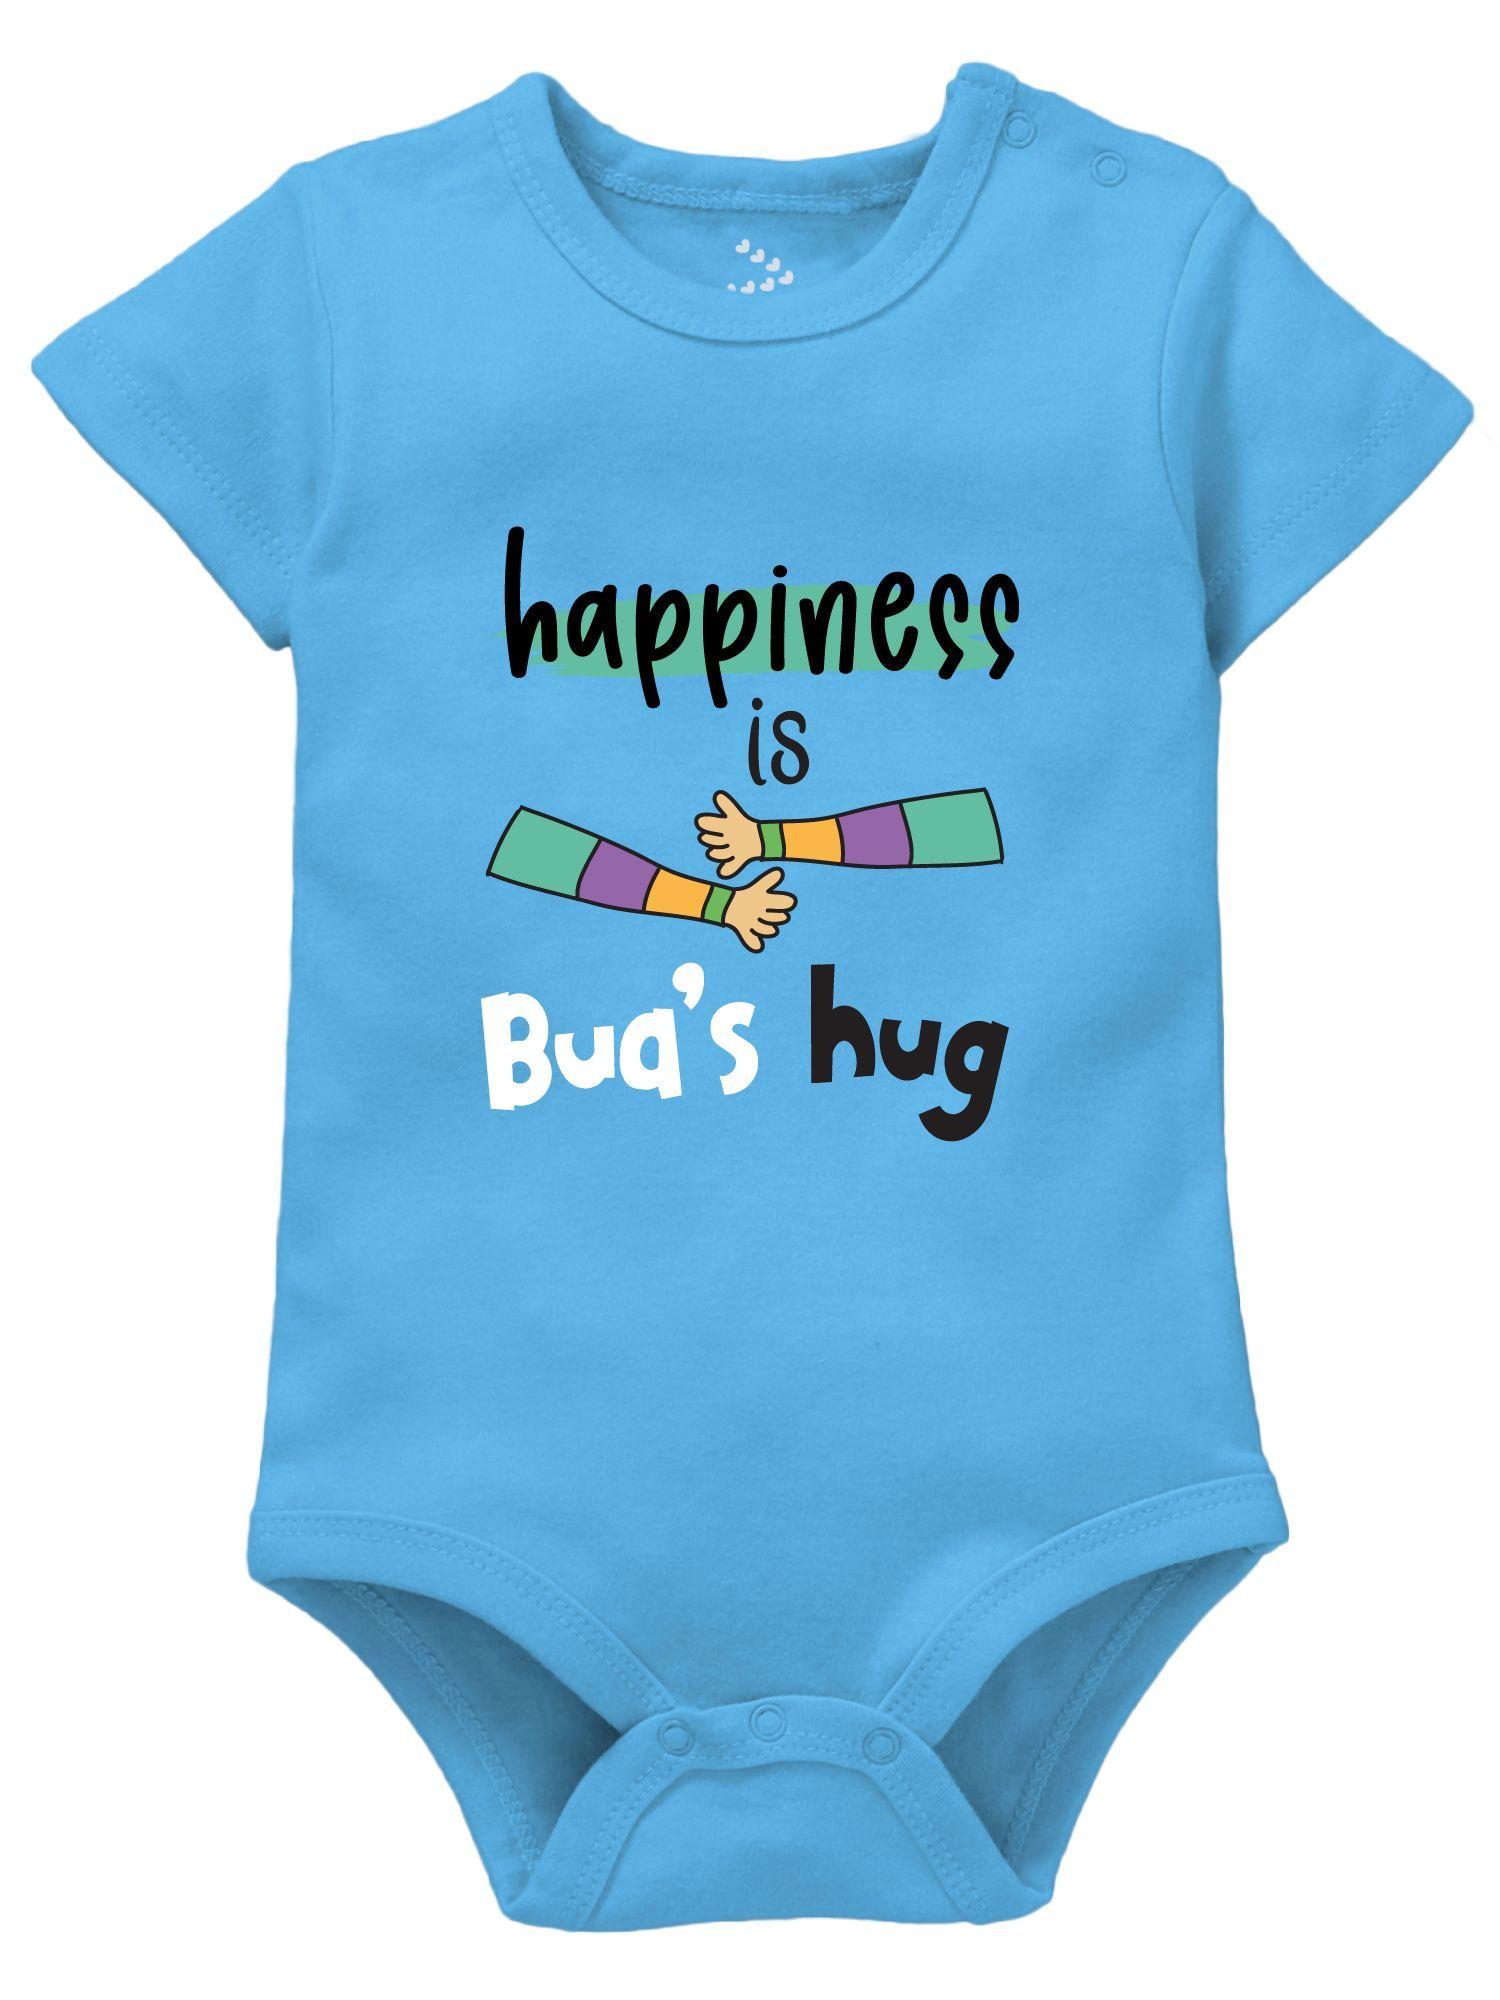 happiness-is-buas-hug-newborn-baby-romper-clothes-bua-&-baby-theme